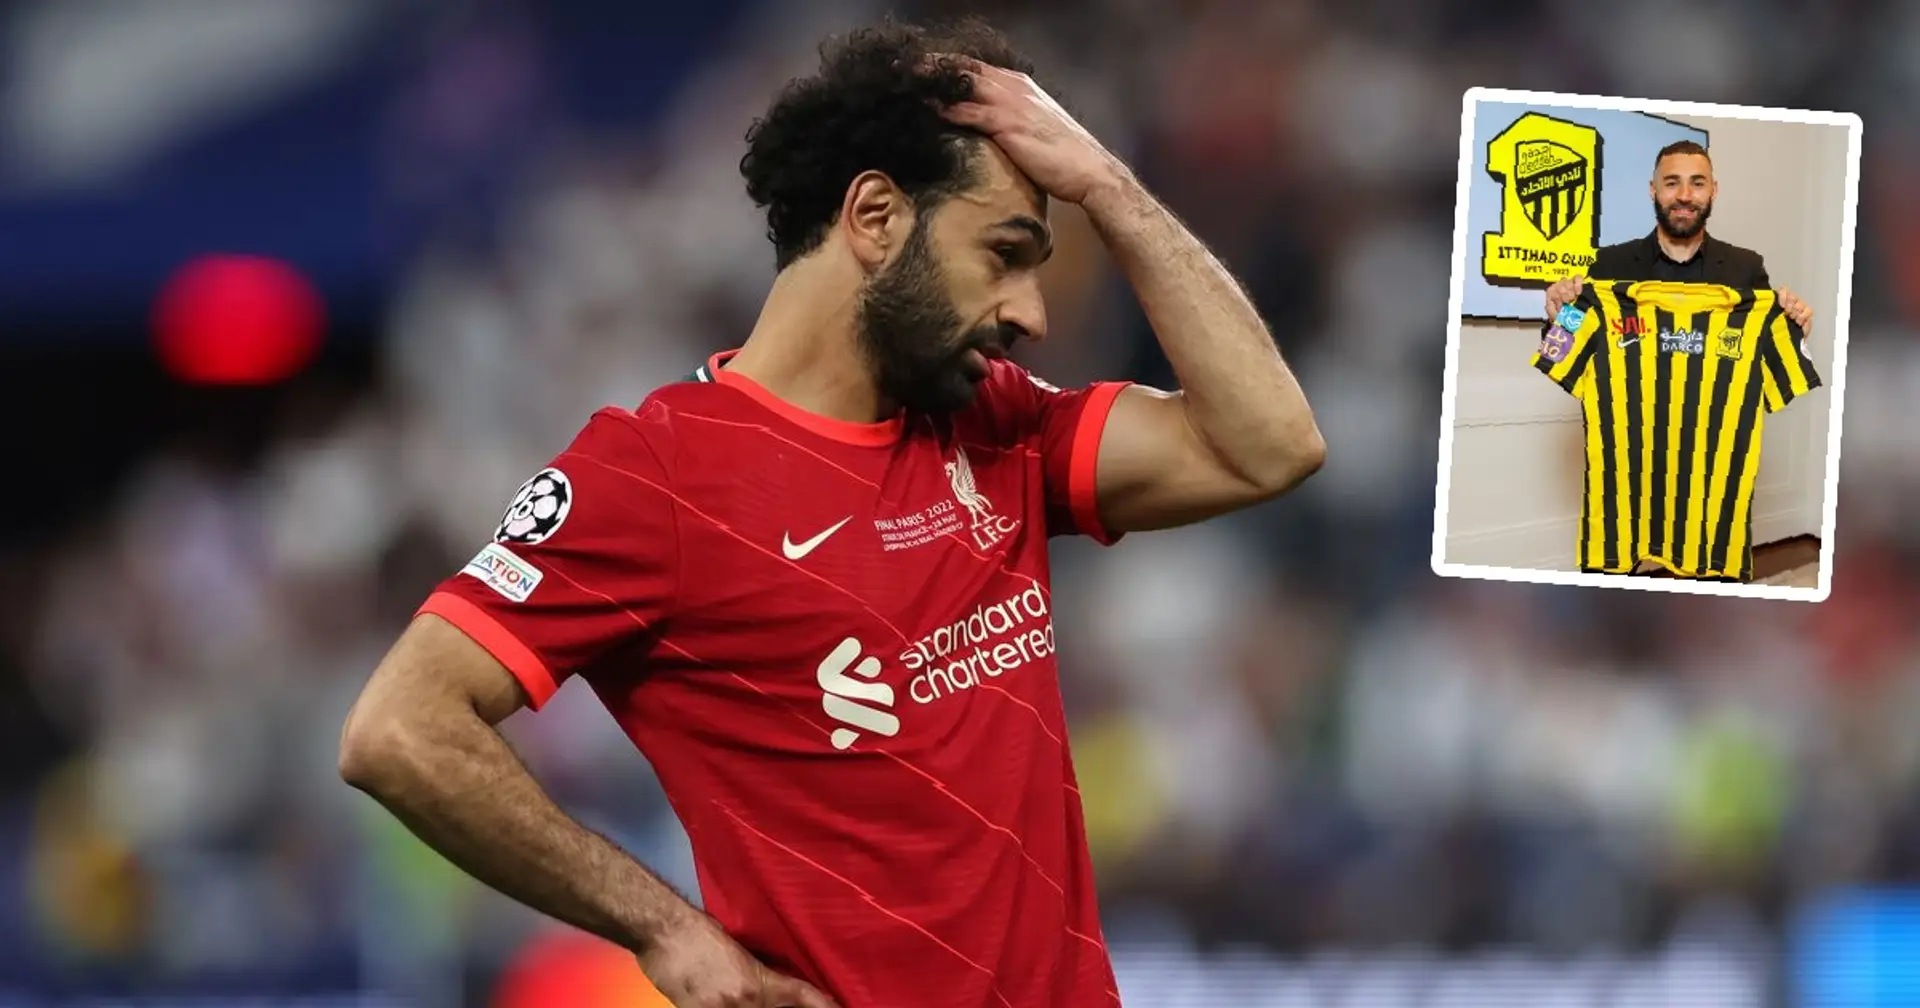 Liverpool draw up potential Salah replacement shortlist - Klopp says he likes one a lot 